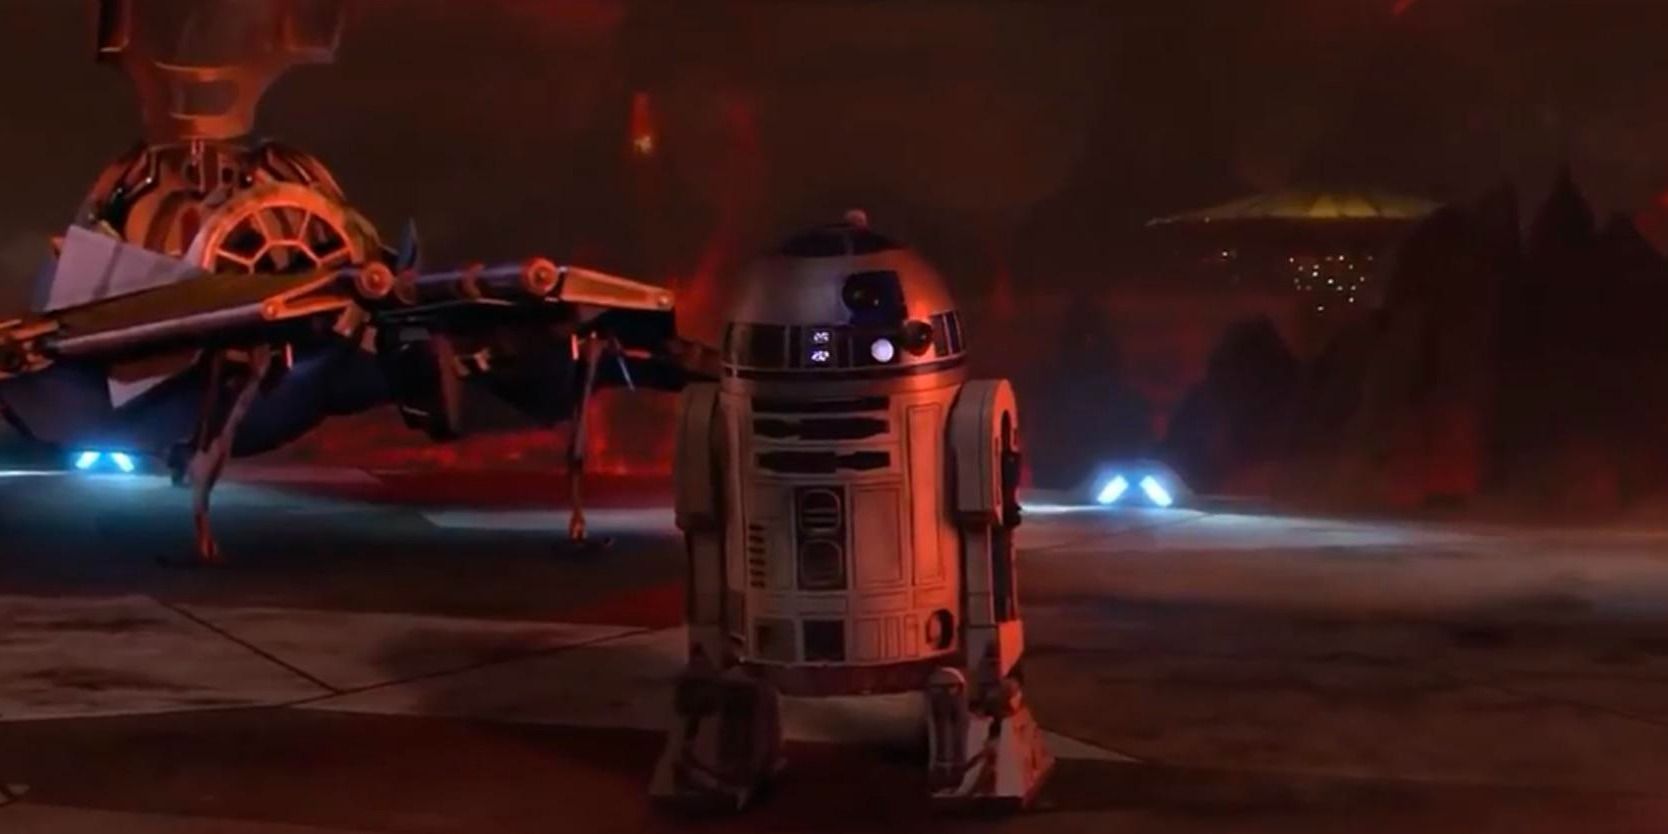 R2-D2 on Mustafar in Star Wars Revenge of the Sith